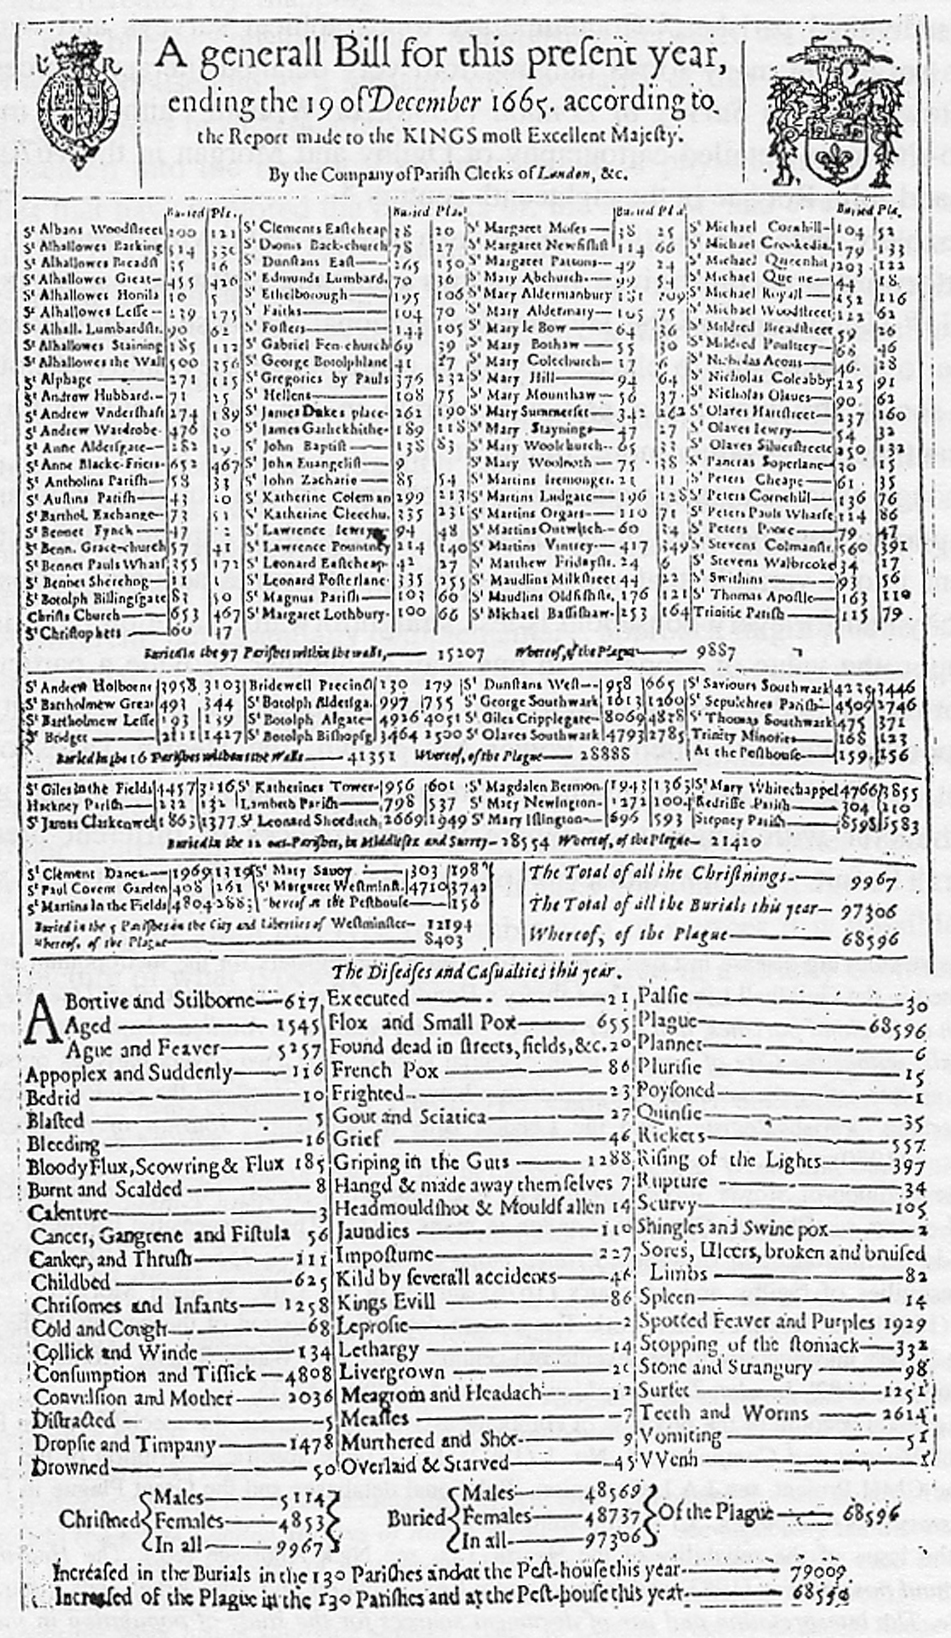 Enlarged image of the annual Bill of Mortality for London and its environs, 1665